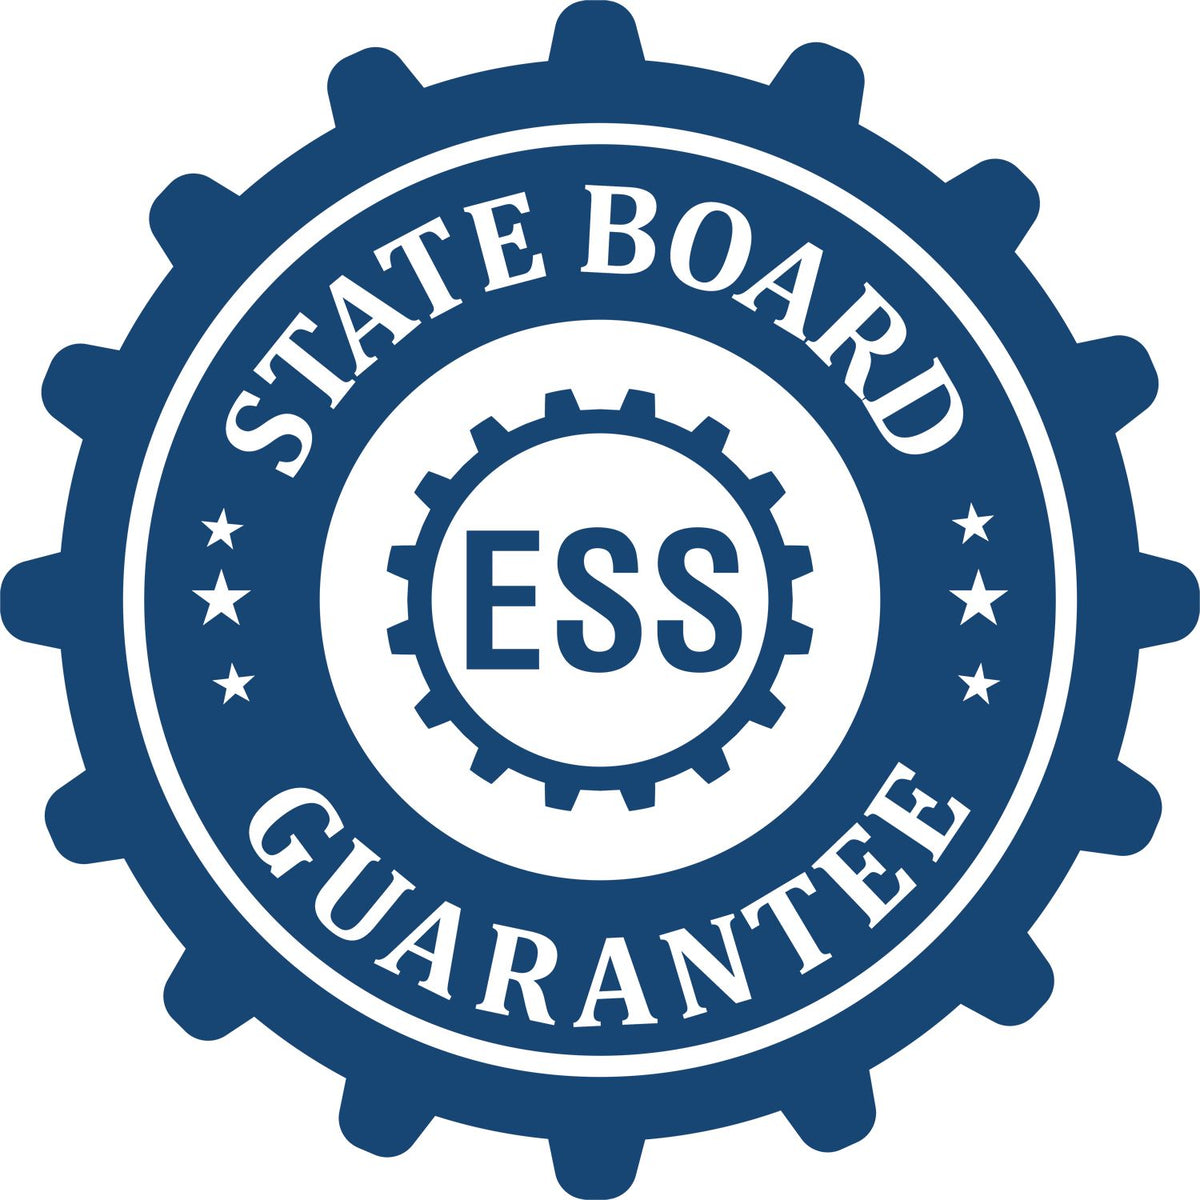 An emblem in a gear shape illustrating a state board guarantee for the State of Tennessee Long Reach Architectural Embossing Seal product.